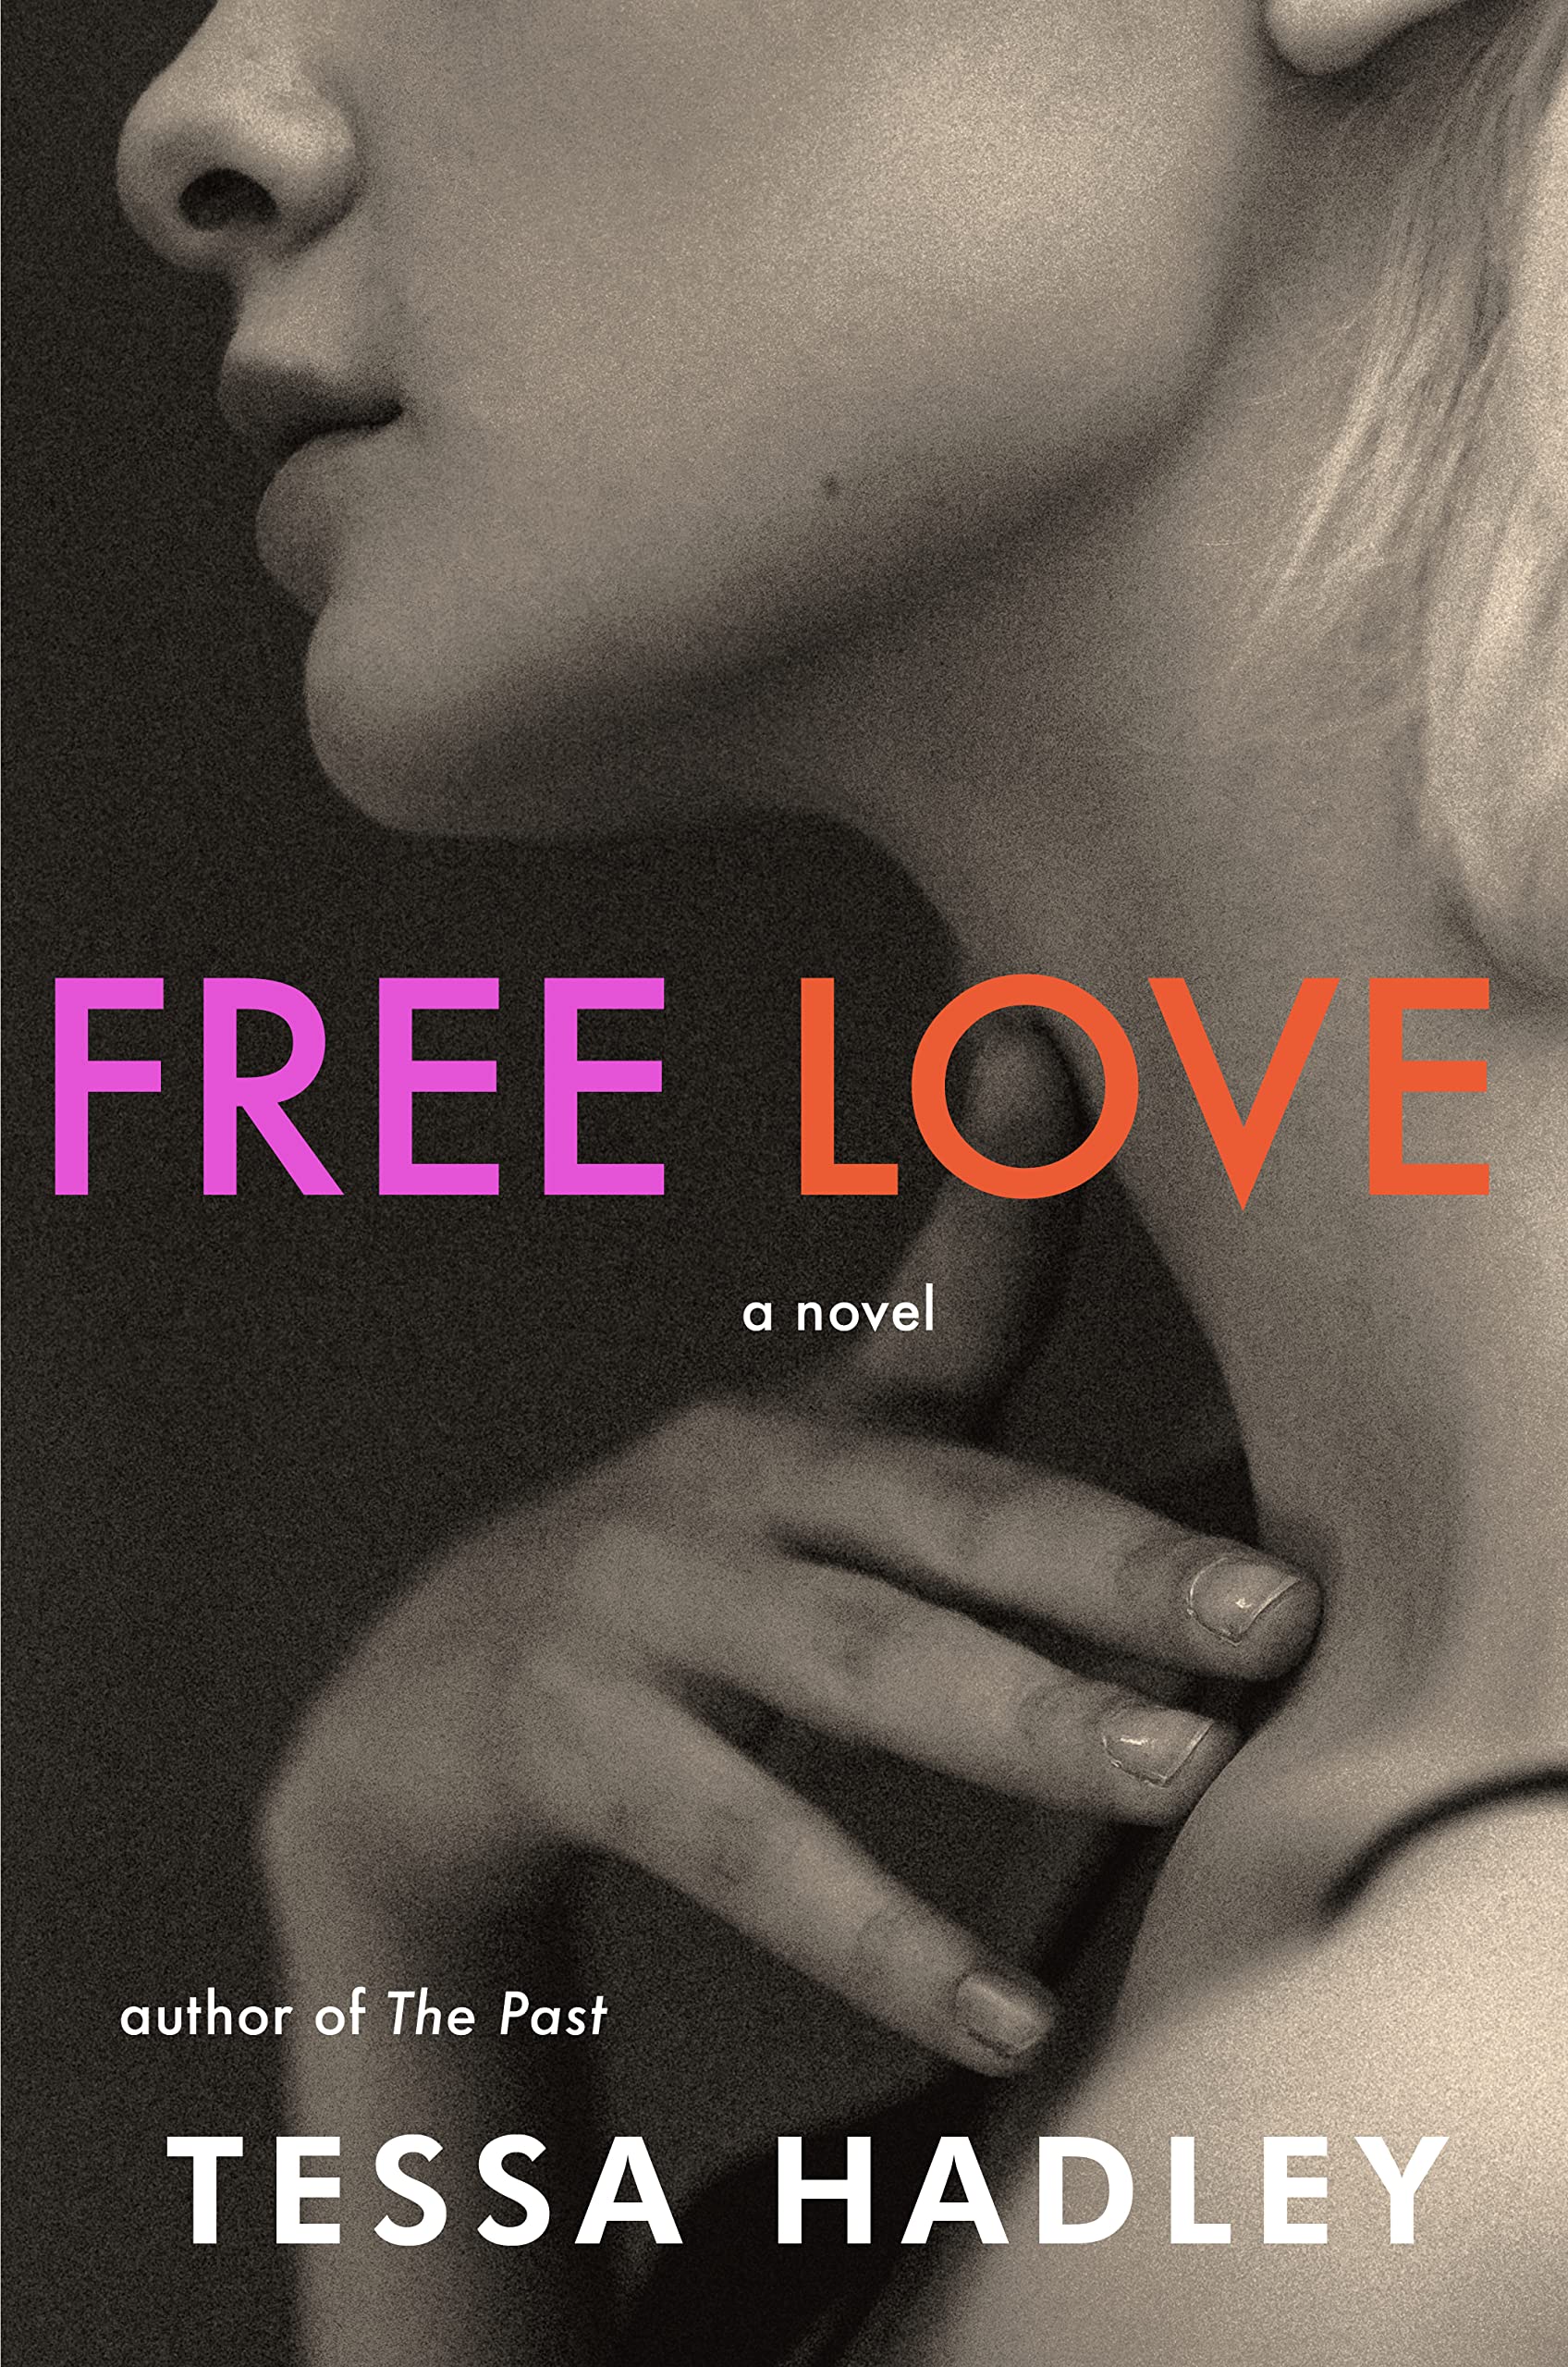 The cover of Free Love